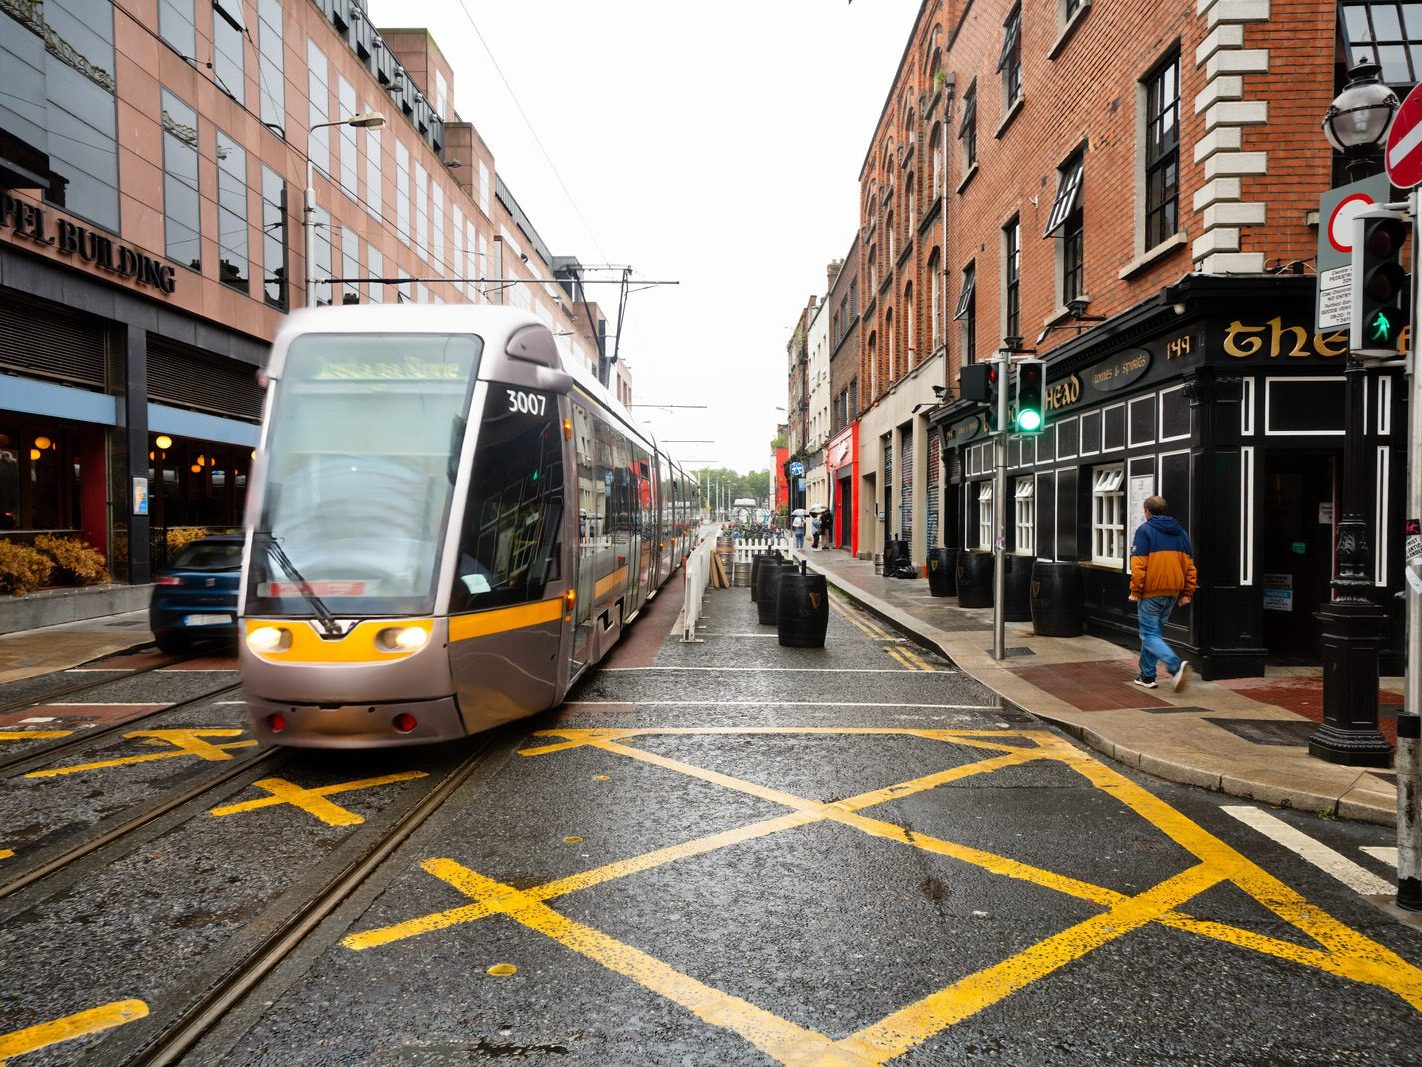 CAPEL STREET ON A DULL WET DAY [INTERIM CAPEL STREET IMPROVEMENT WORKS ARE NOW ONGOING] 028